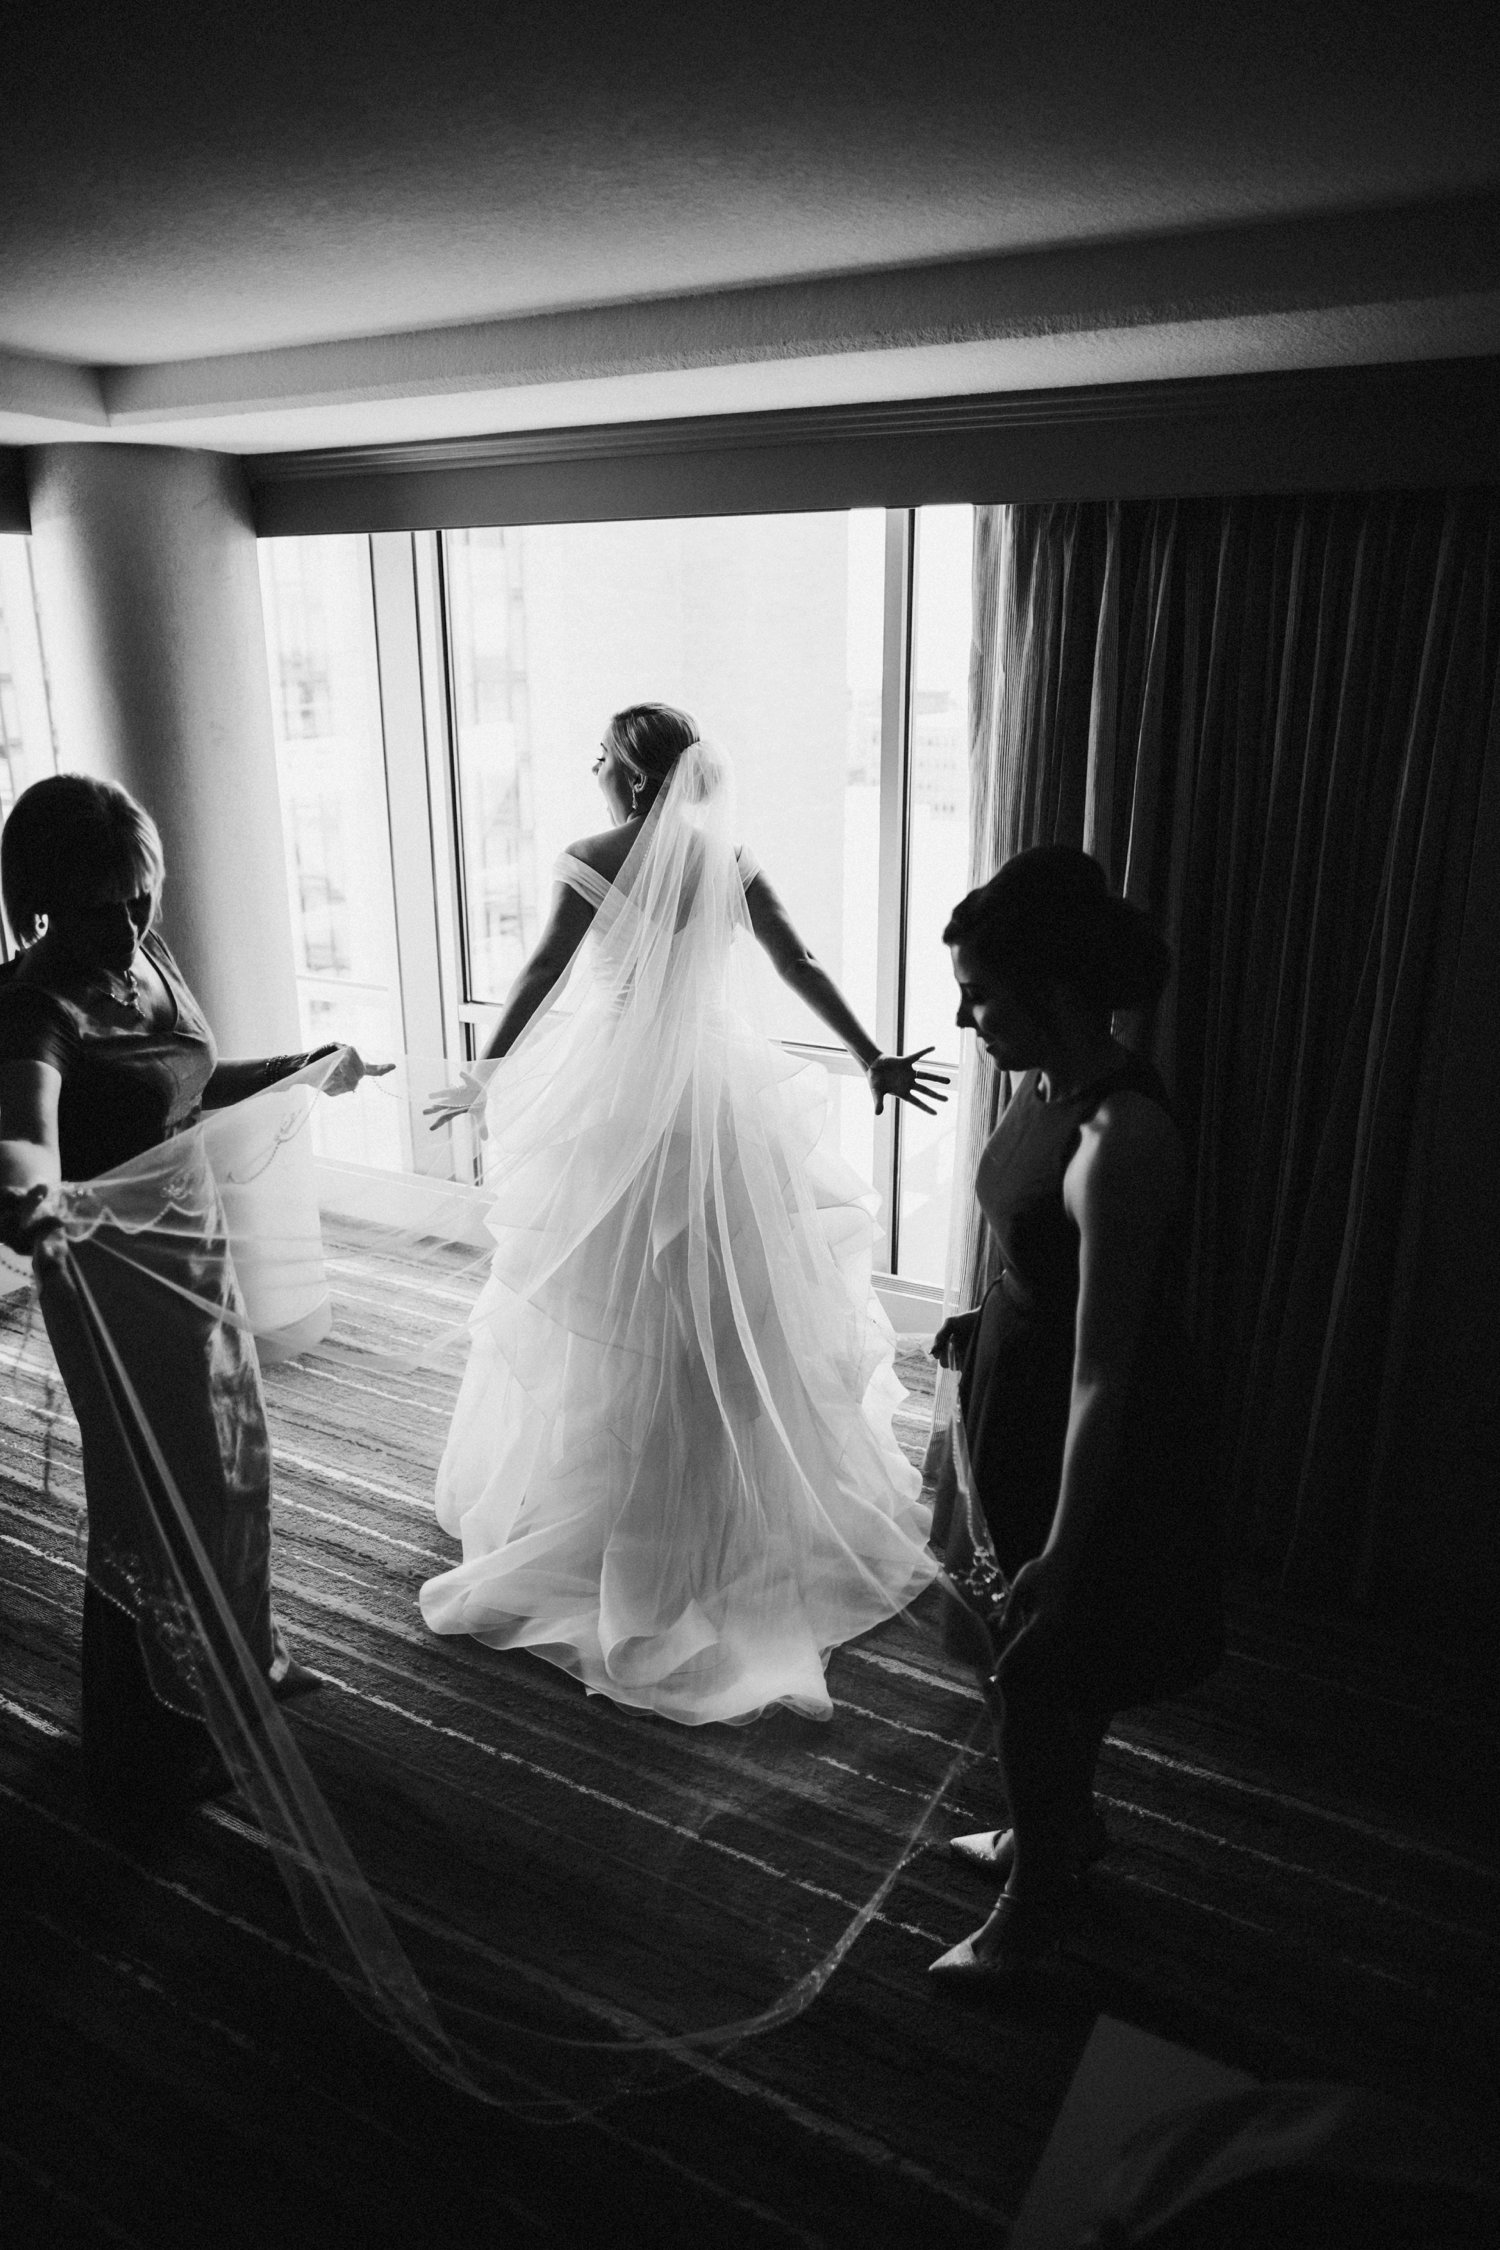  images by feliciathephotographer.com | destination wedding photographer | kansas city | summertime | classic | getting ready | details | mother of the bride | putting on the dress | the gown gallery | pink dress | fitted bodice | maggie sottero | black and white | 